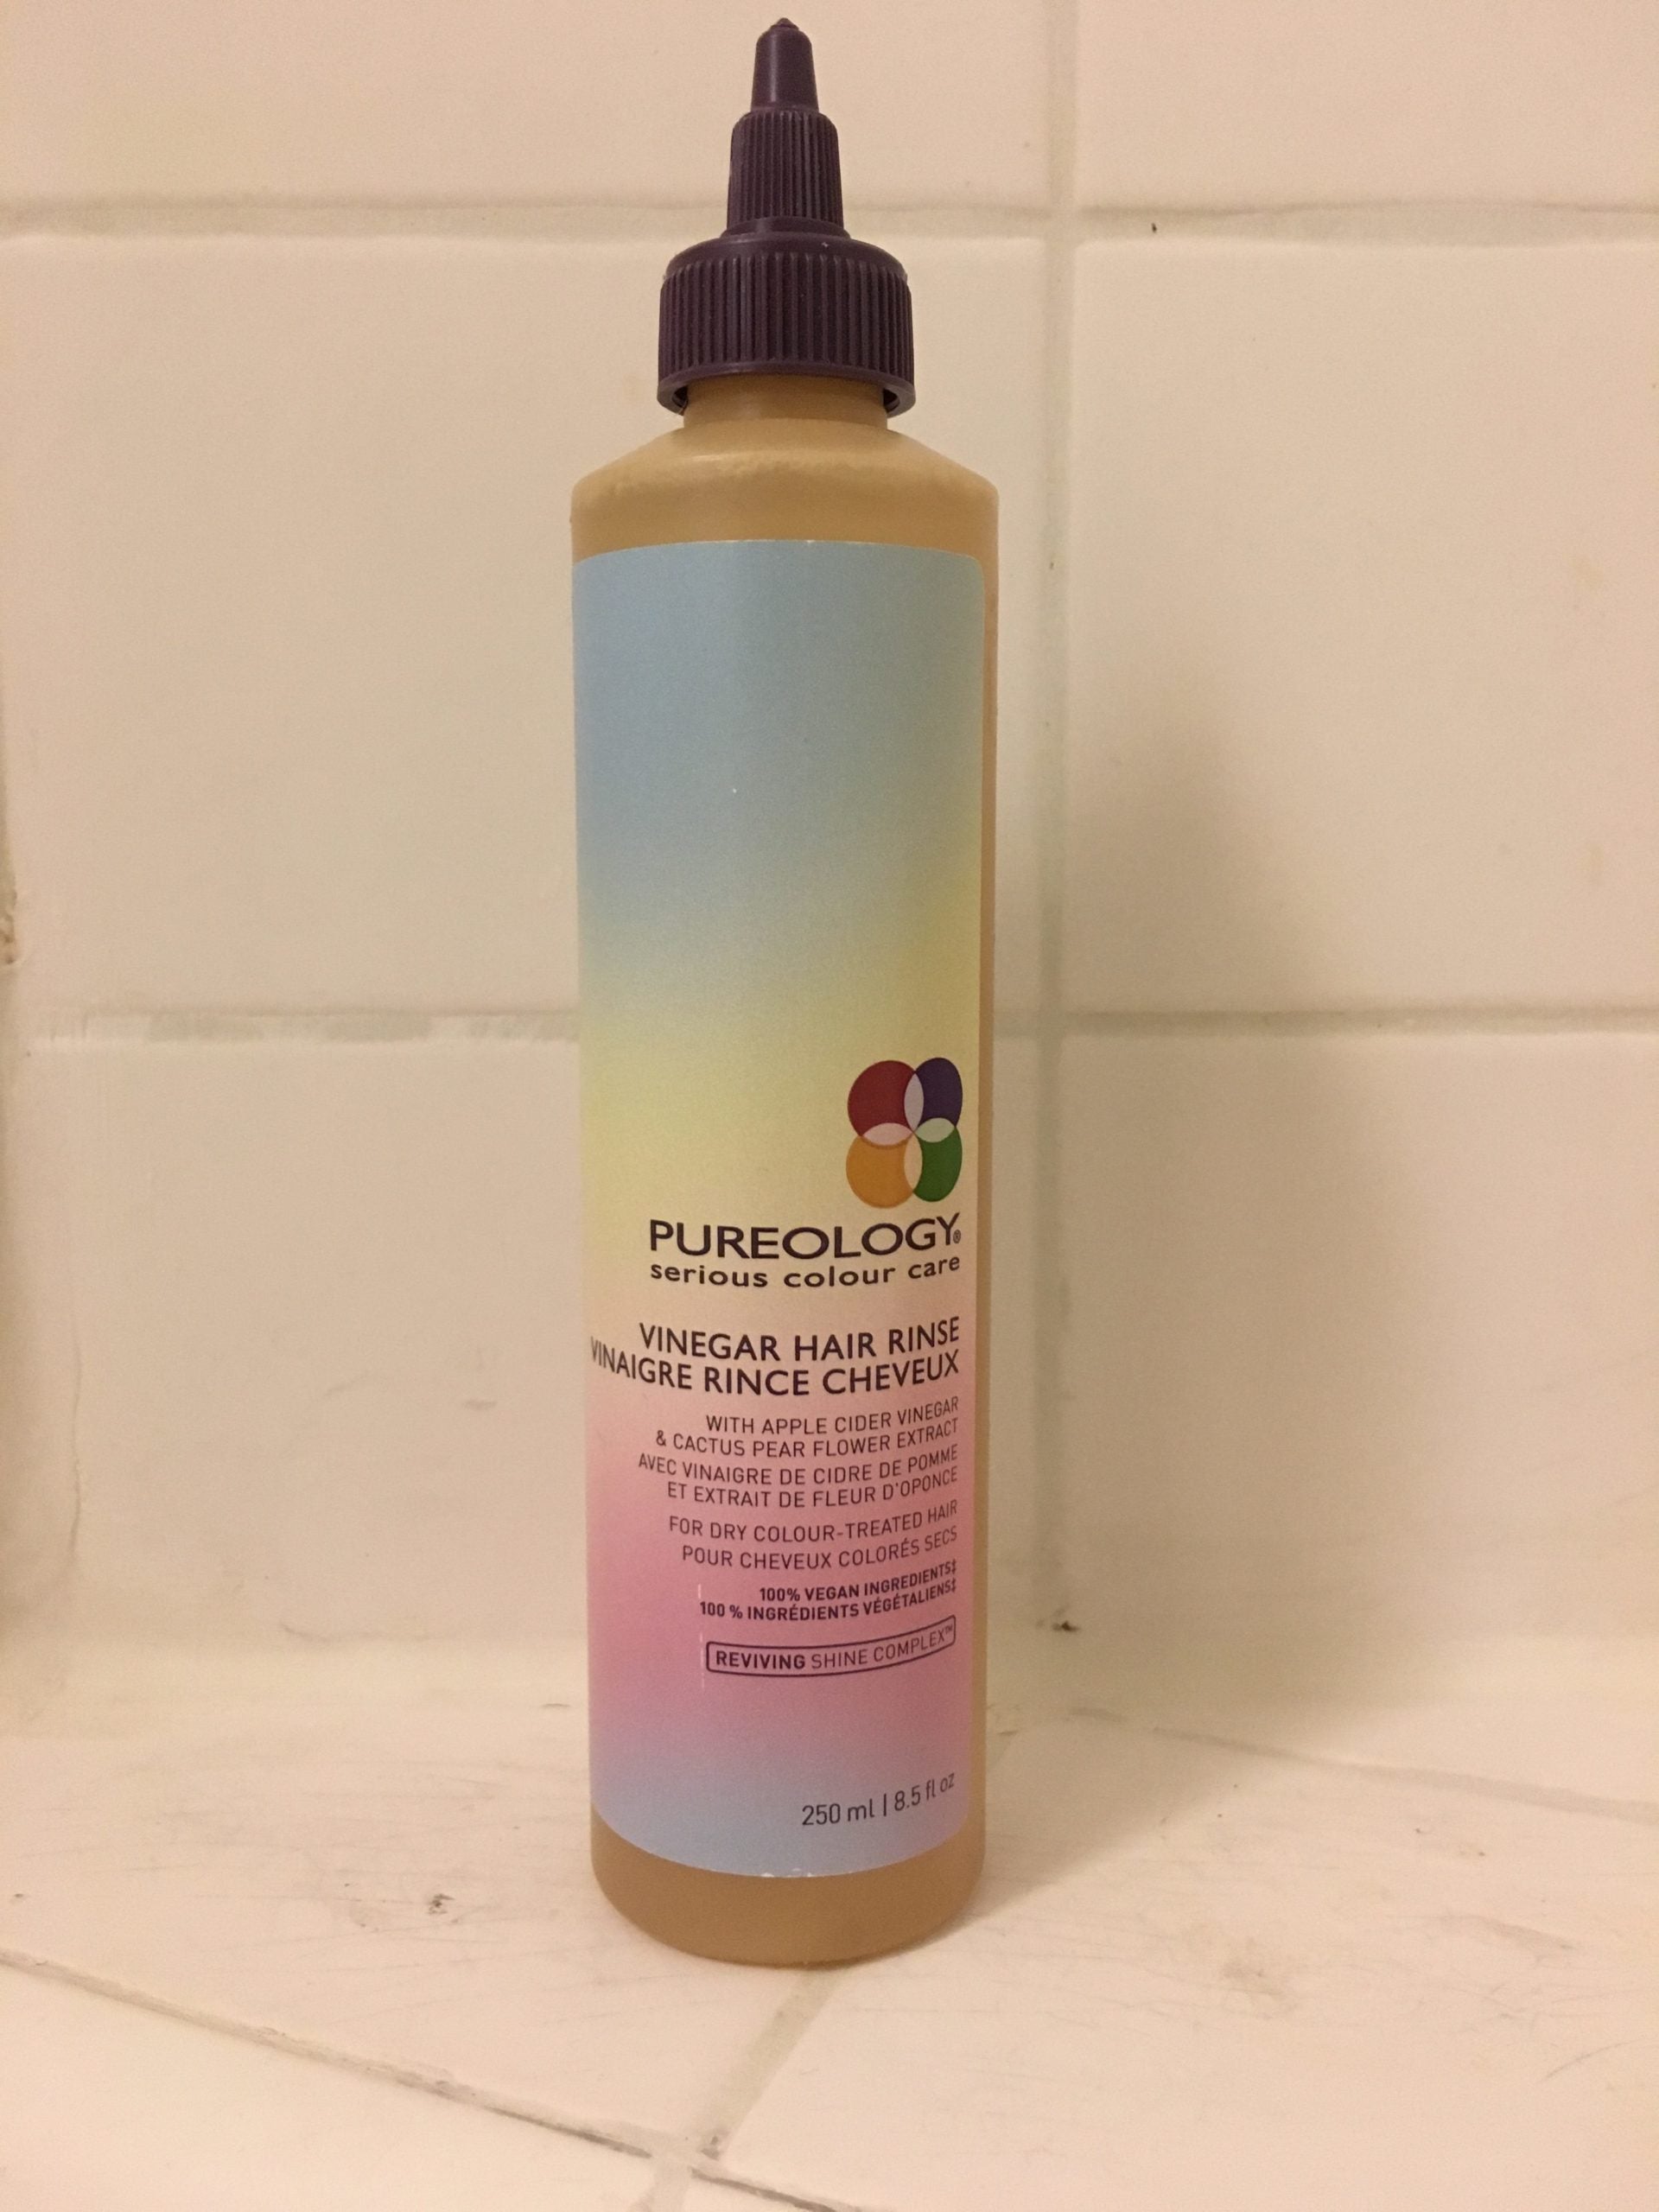 Review, Photos, Ingredients, Hairstyle, Haircare Trend 2018, 2019, 2020: Get Healthier, Shinier Hair, Pureology Vinegar Hair Rinse, Remove Hair Product Build Up